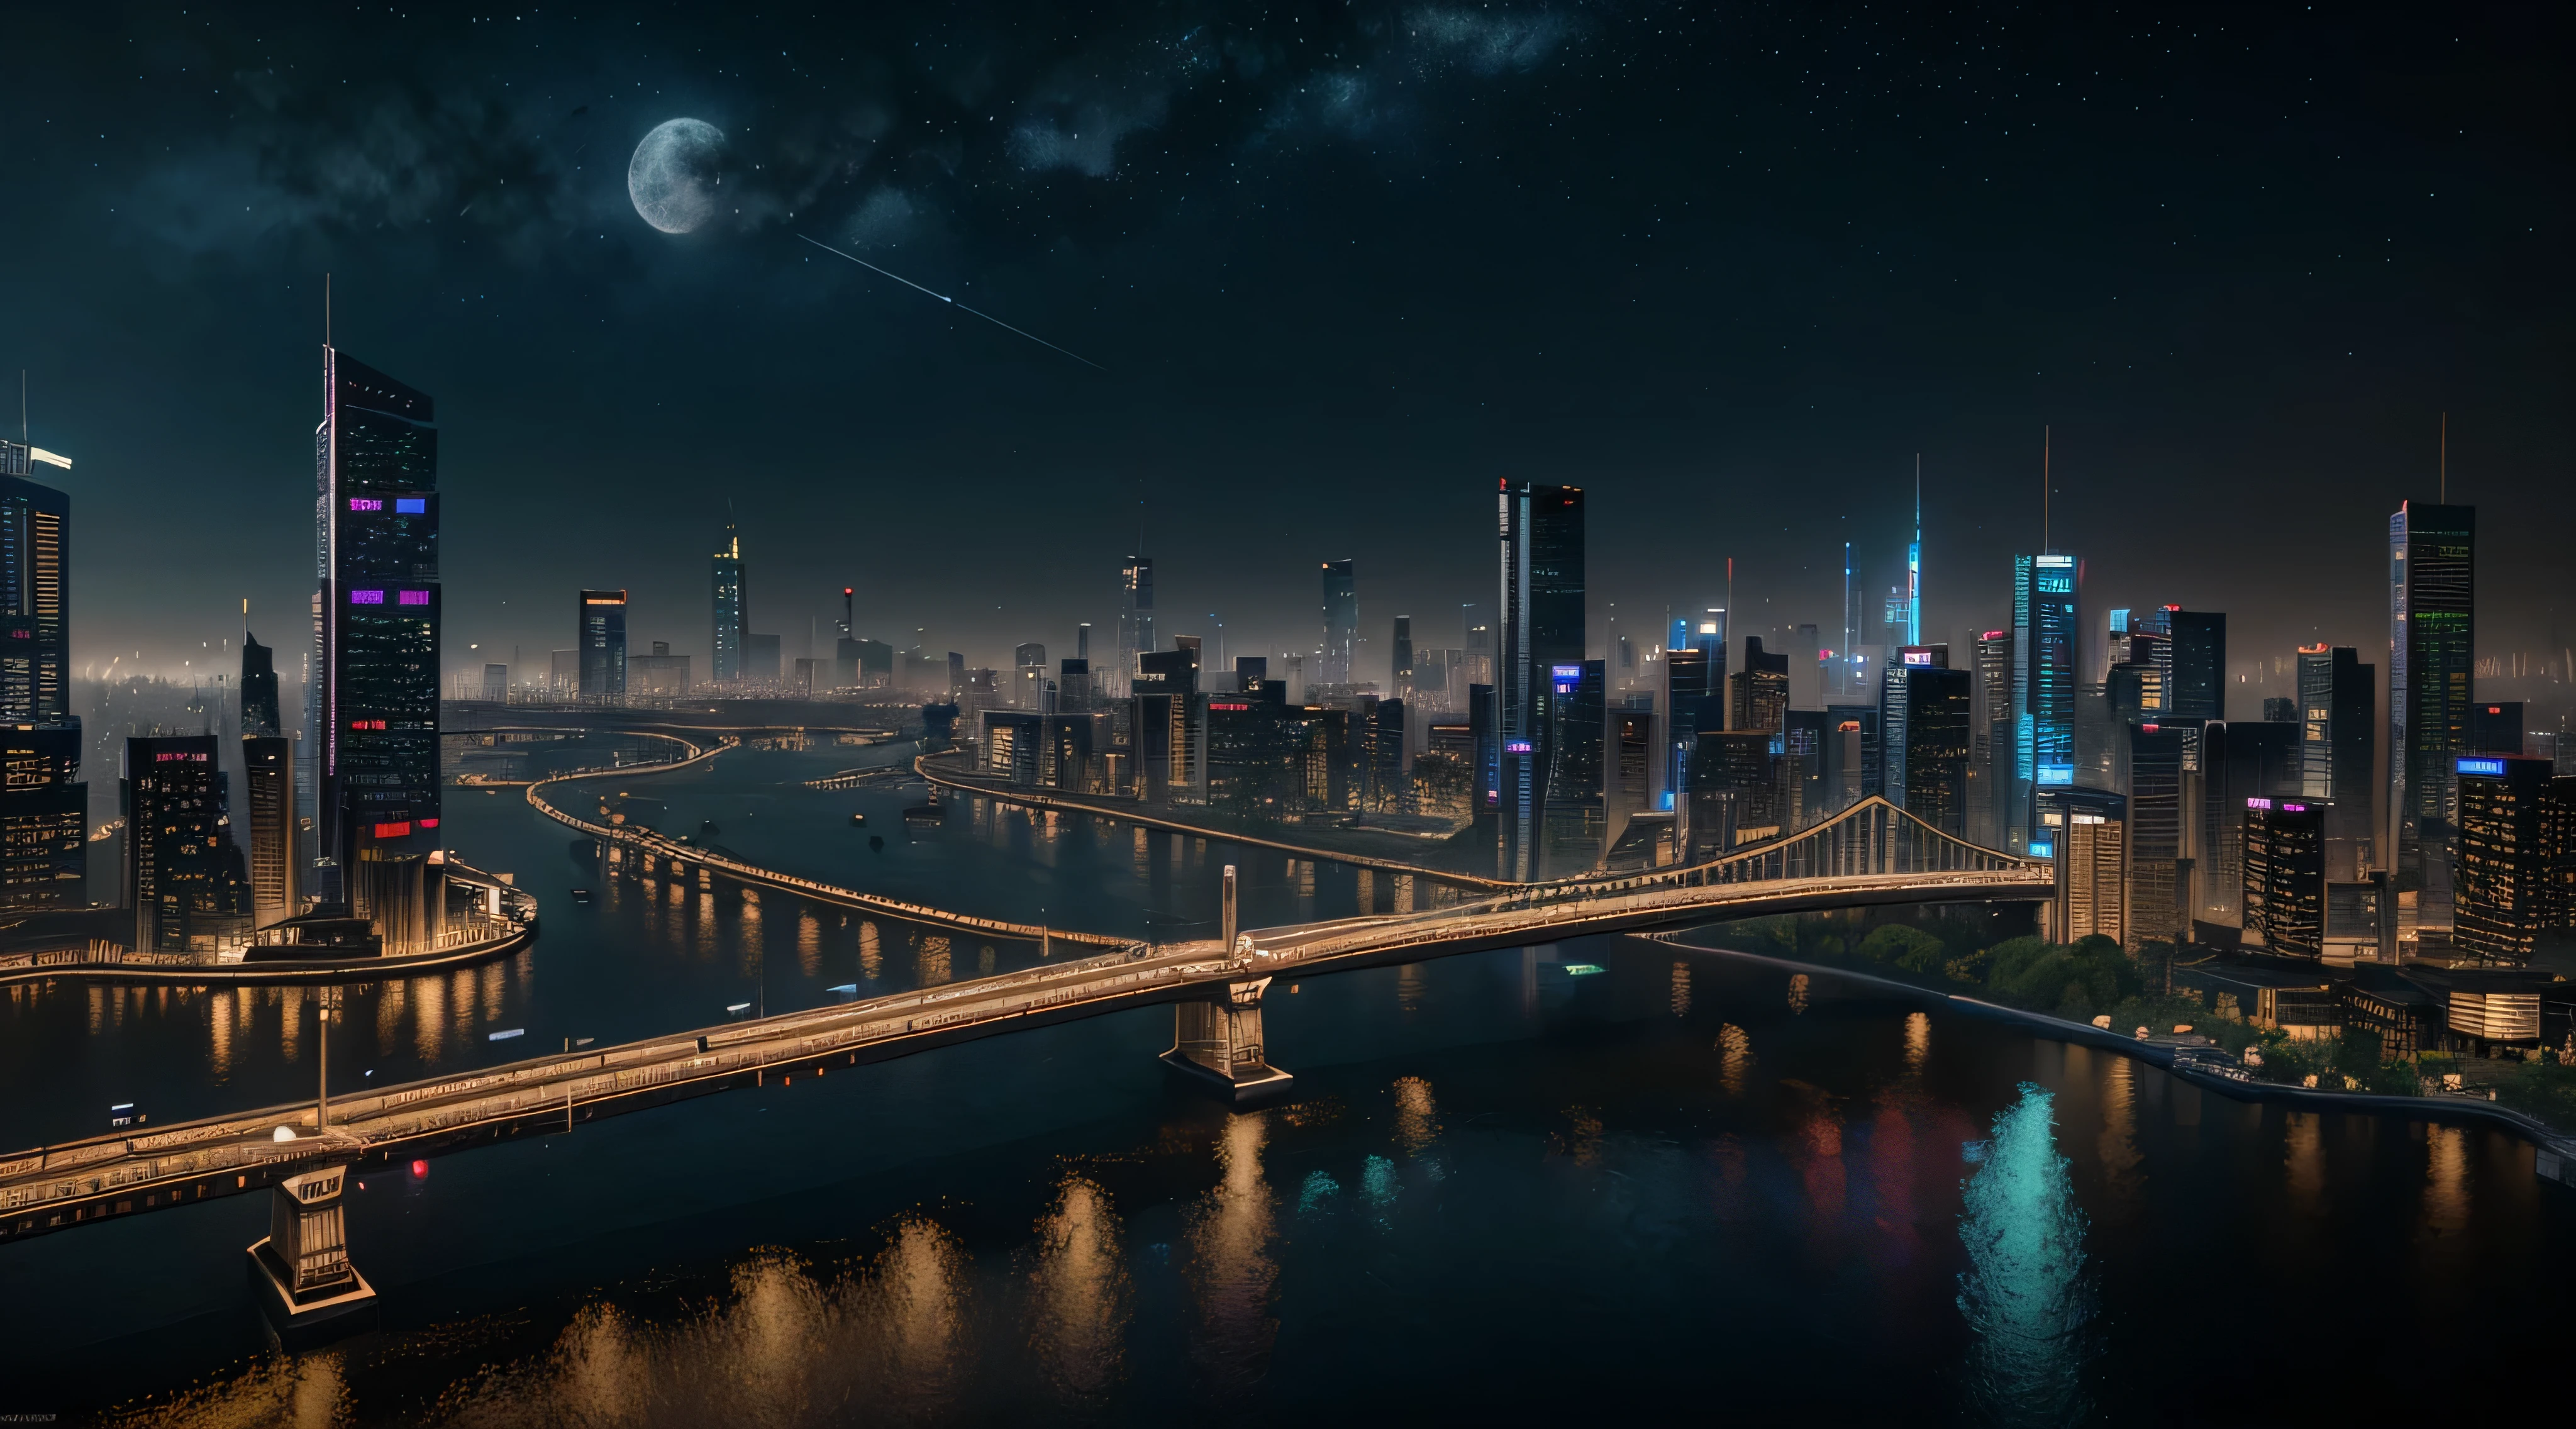 {{masterpiece, best quality, extremely detailed CG, unreal engine 4 8k wallpaper, cinematic lighting}}, city skyline, cyberpunk world, cyberpunk 2077, blade runner, river at the bottom of the shot, bridge on the left, nighttime, starry sky, small brigt moon, advertising boards, advertising blimp, 